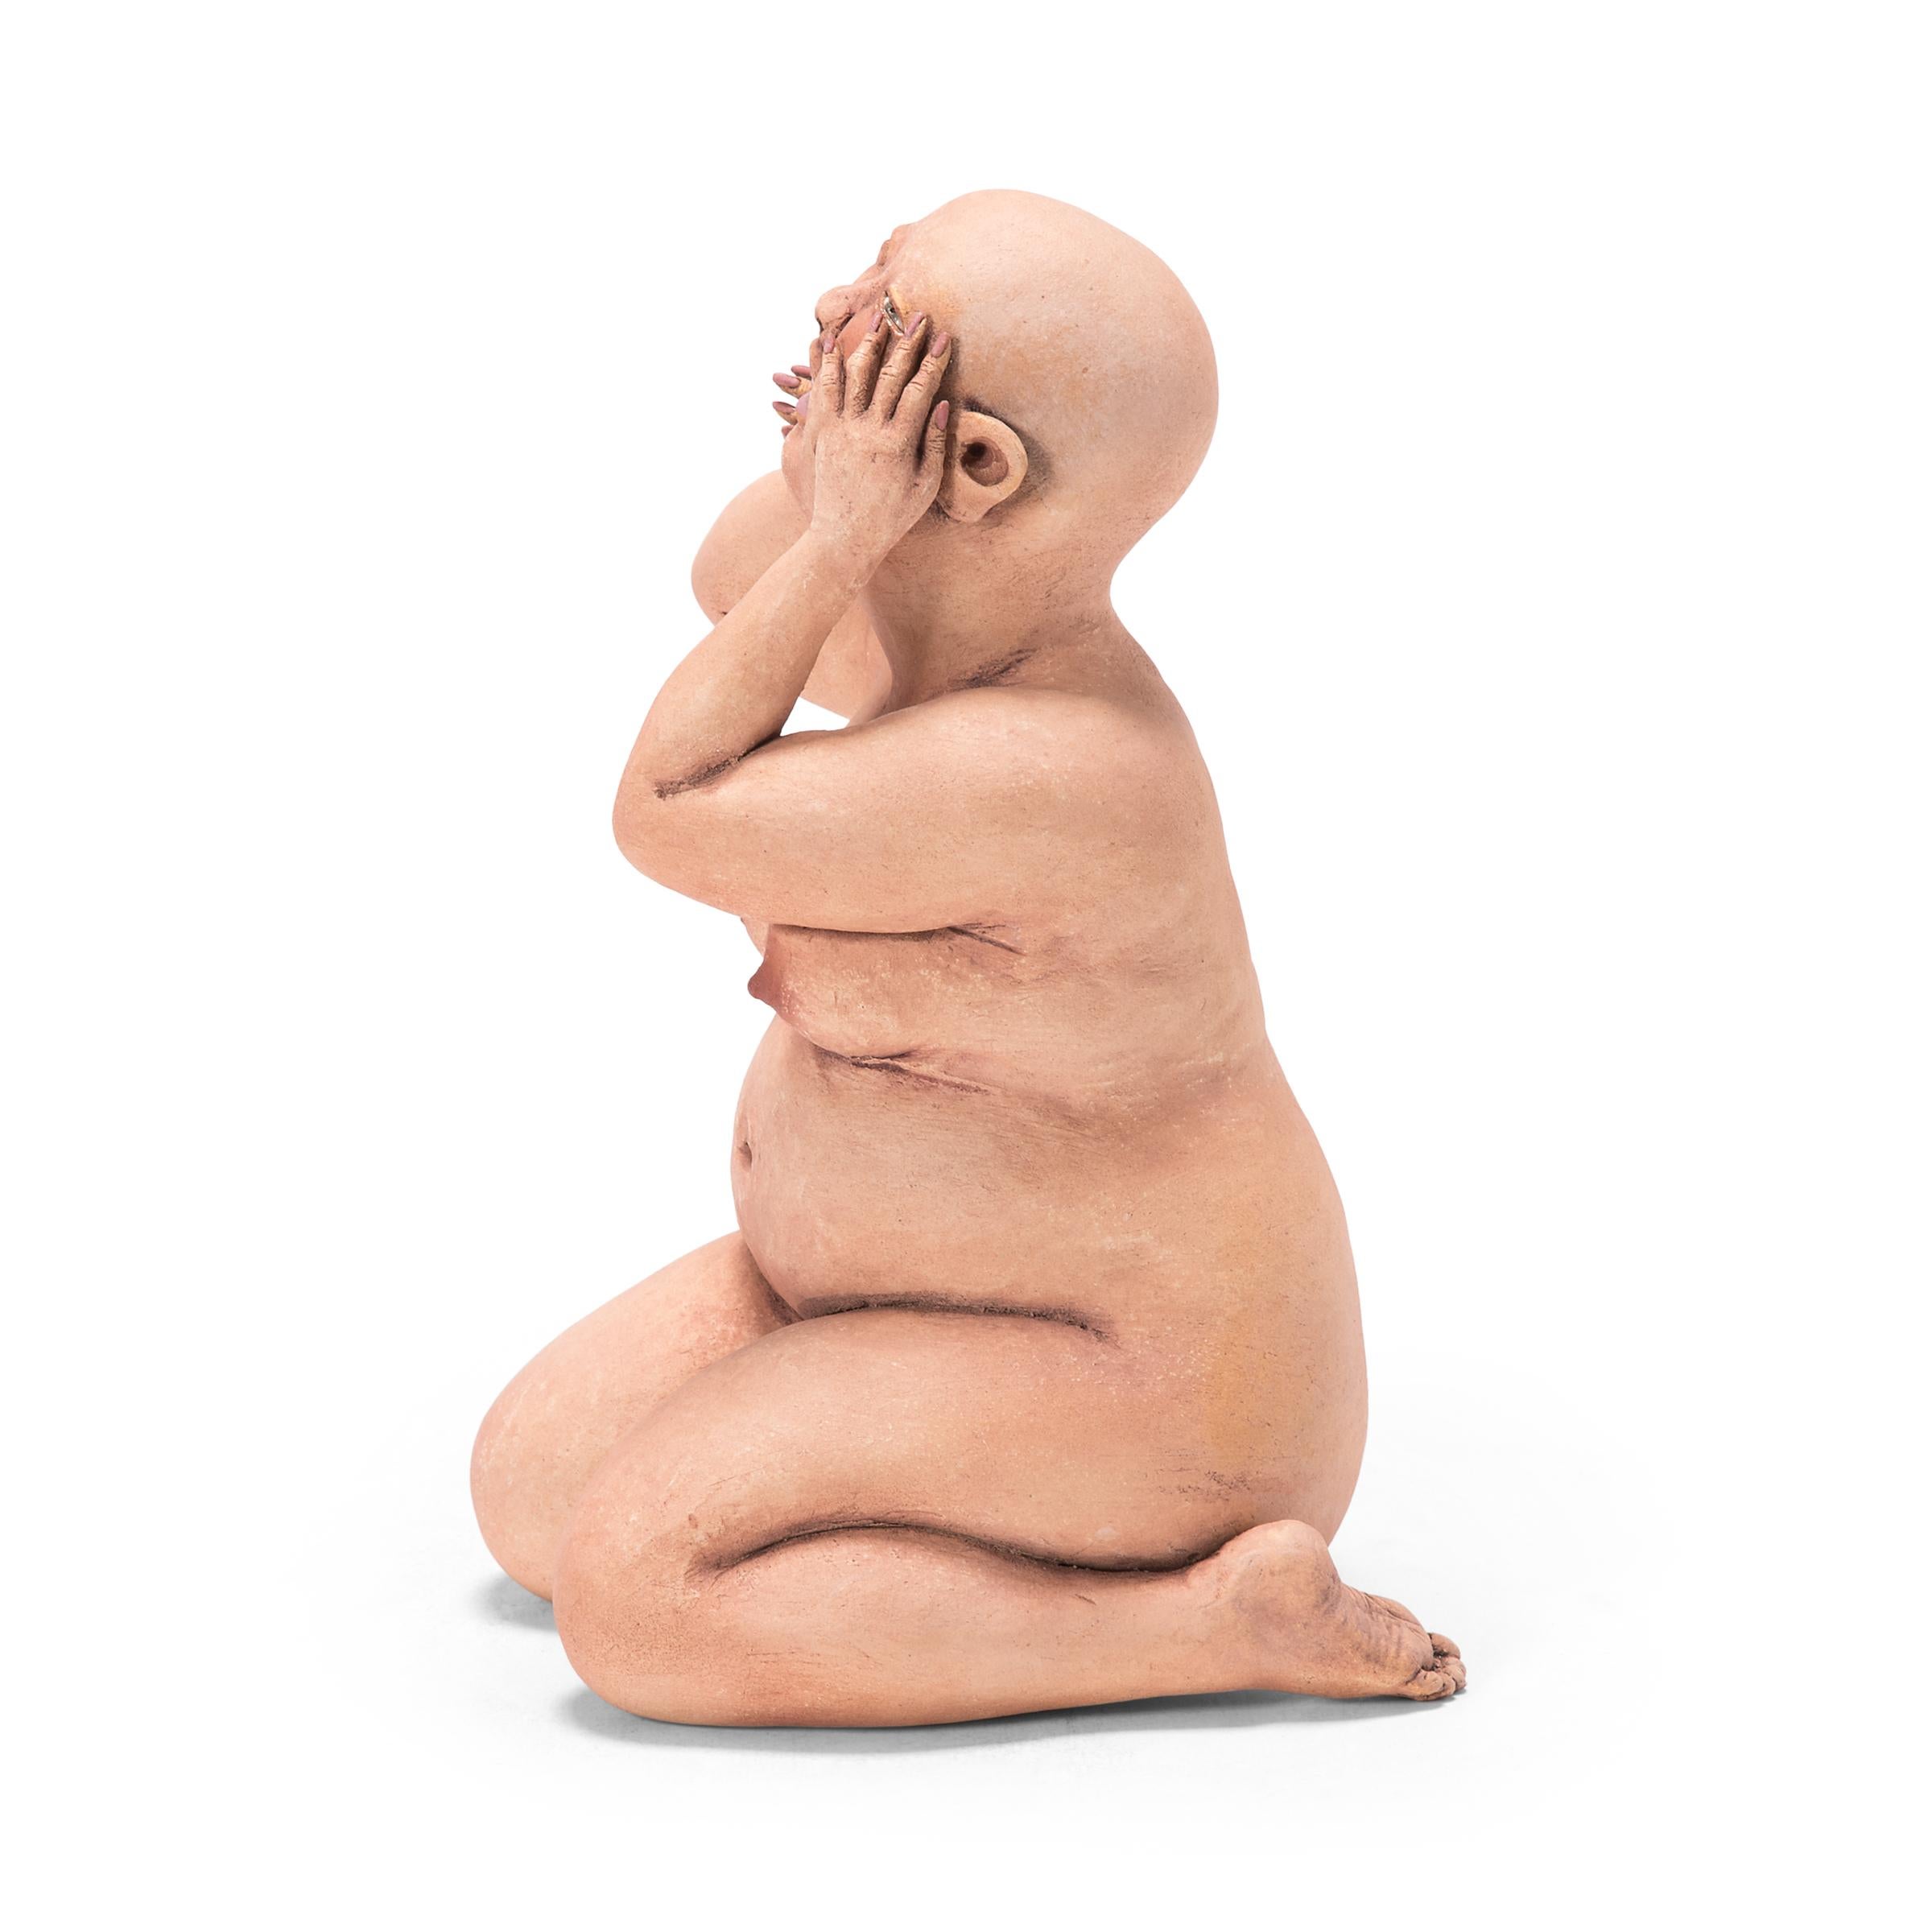 Bald and chunky, Esther Shimazu’s quirky clay figures are unabashedly naked and delightfully indulgent. Drawing up on her Japanese ancestry and experience living in a laid-back Asian community in Hawaii, the artist imbues her figures with a